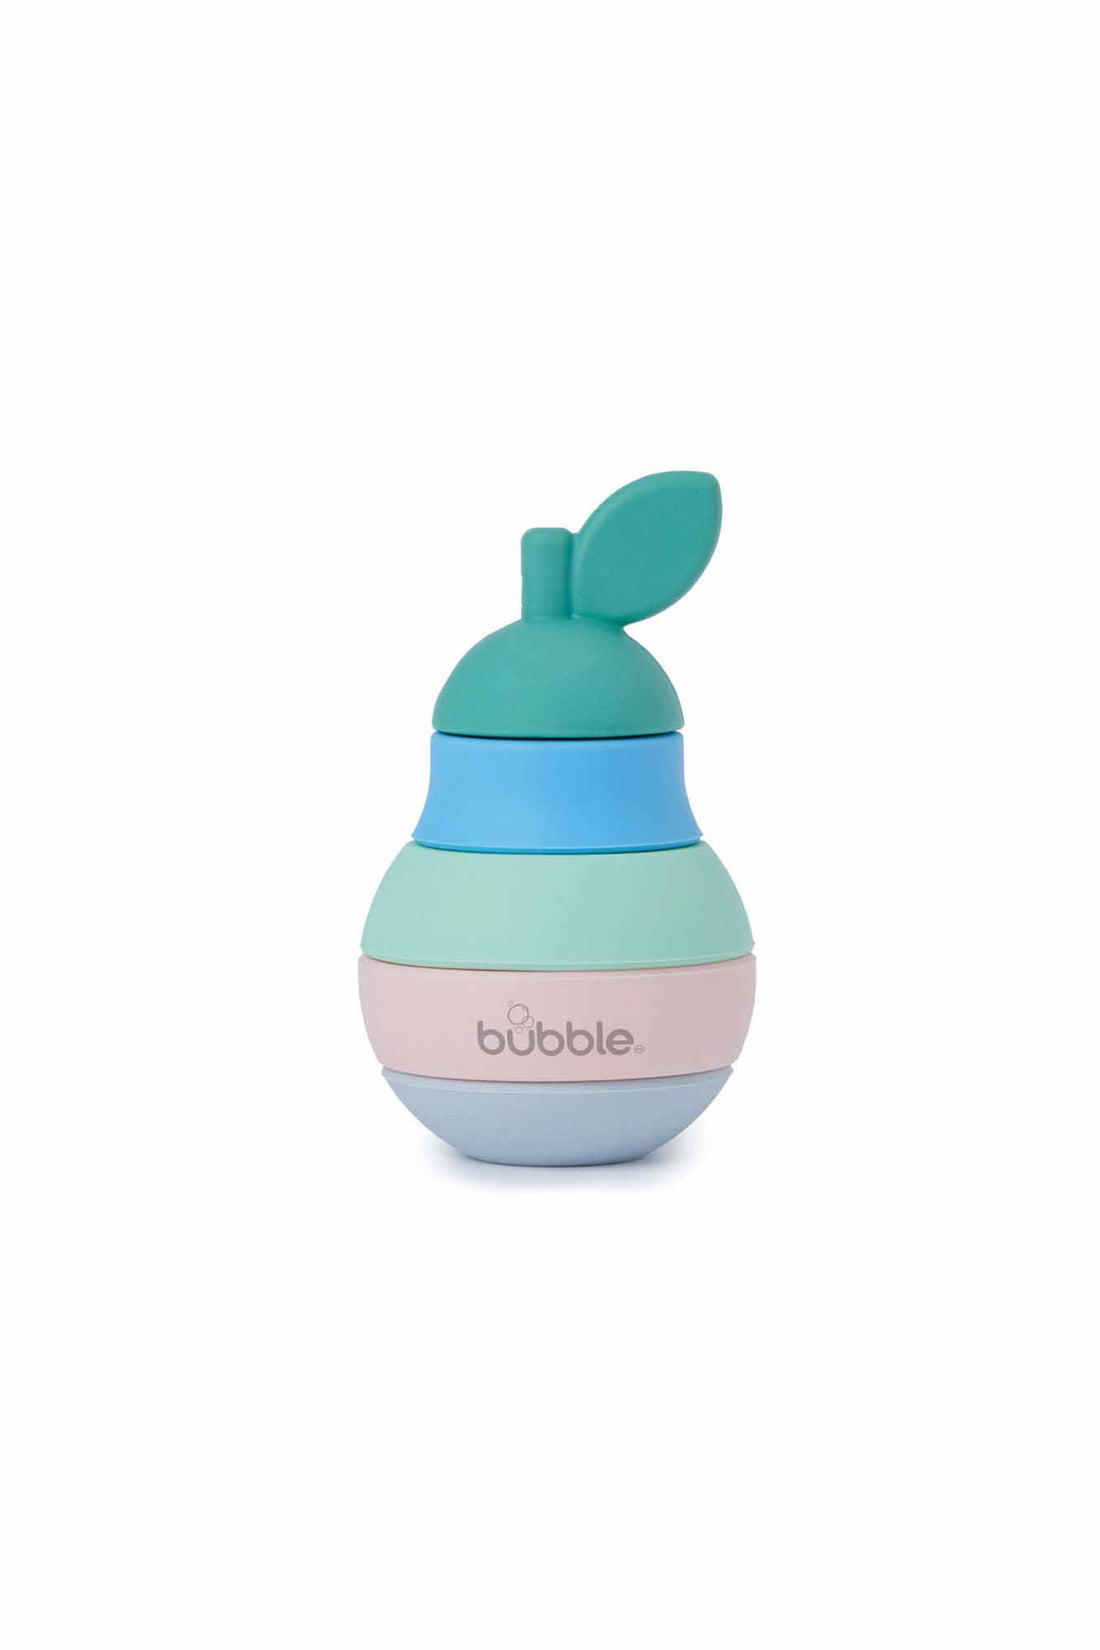 Bubble Silicone Stacking Pear Teether